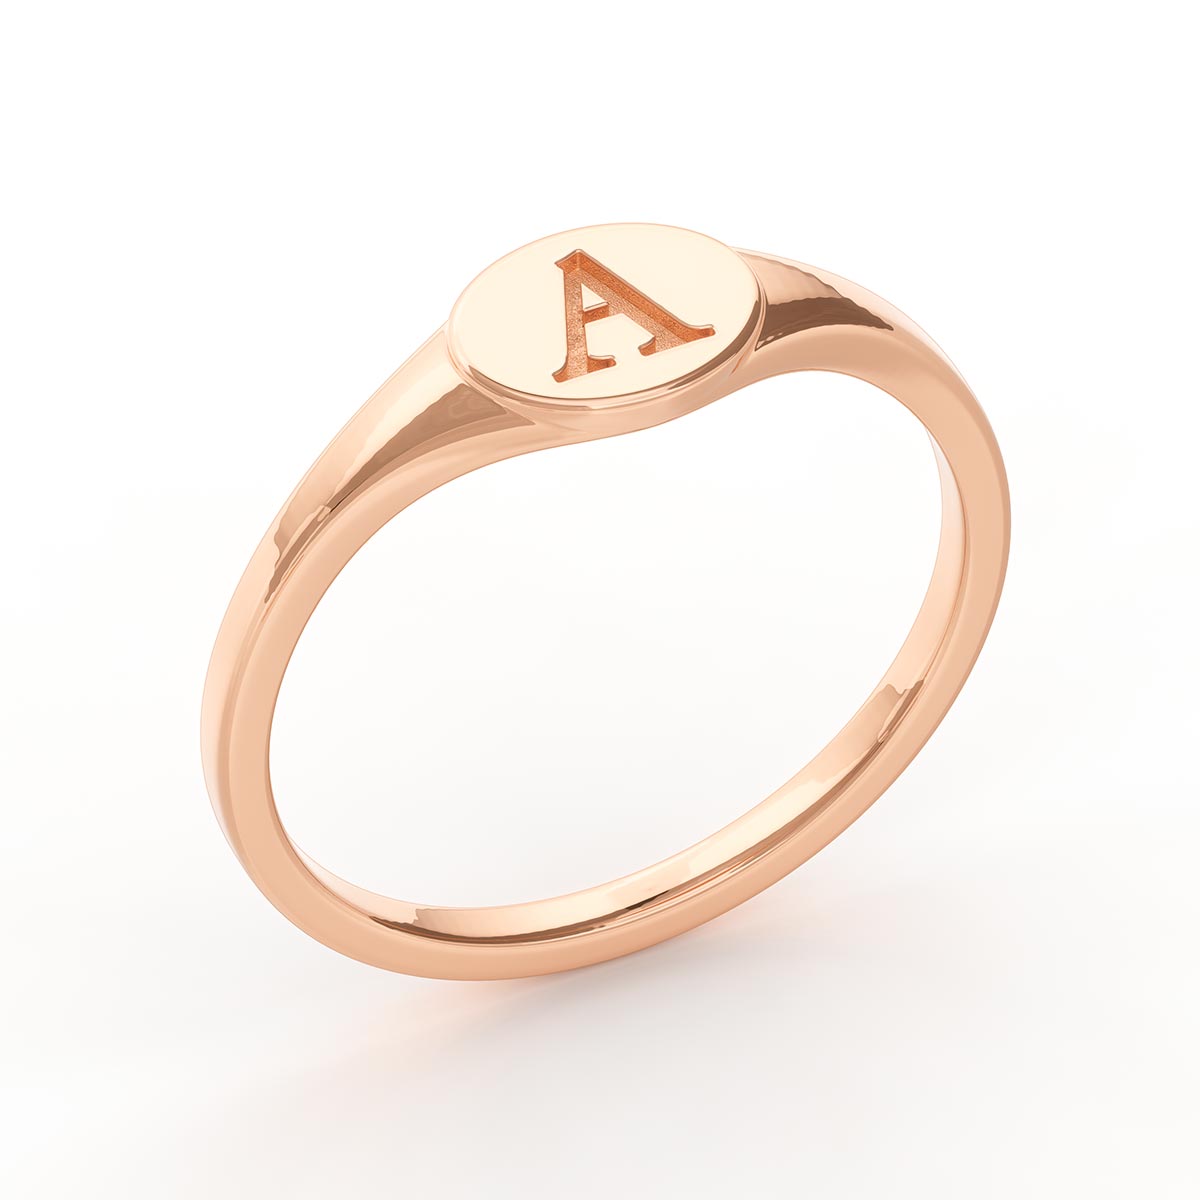 Personalized Initial Signet Ring